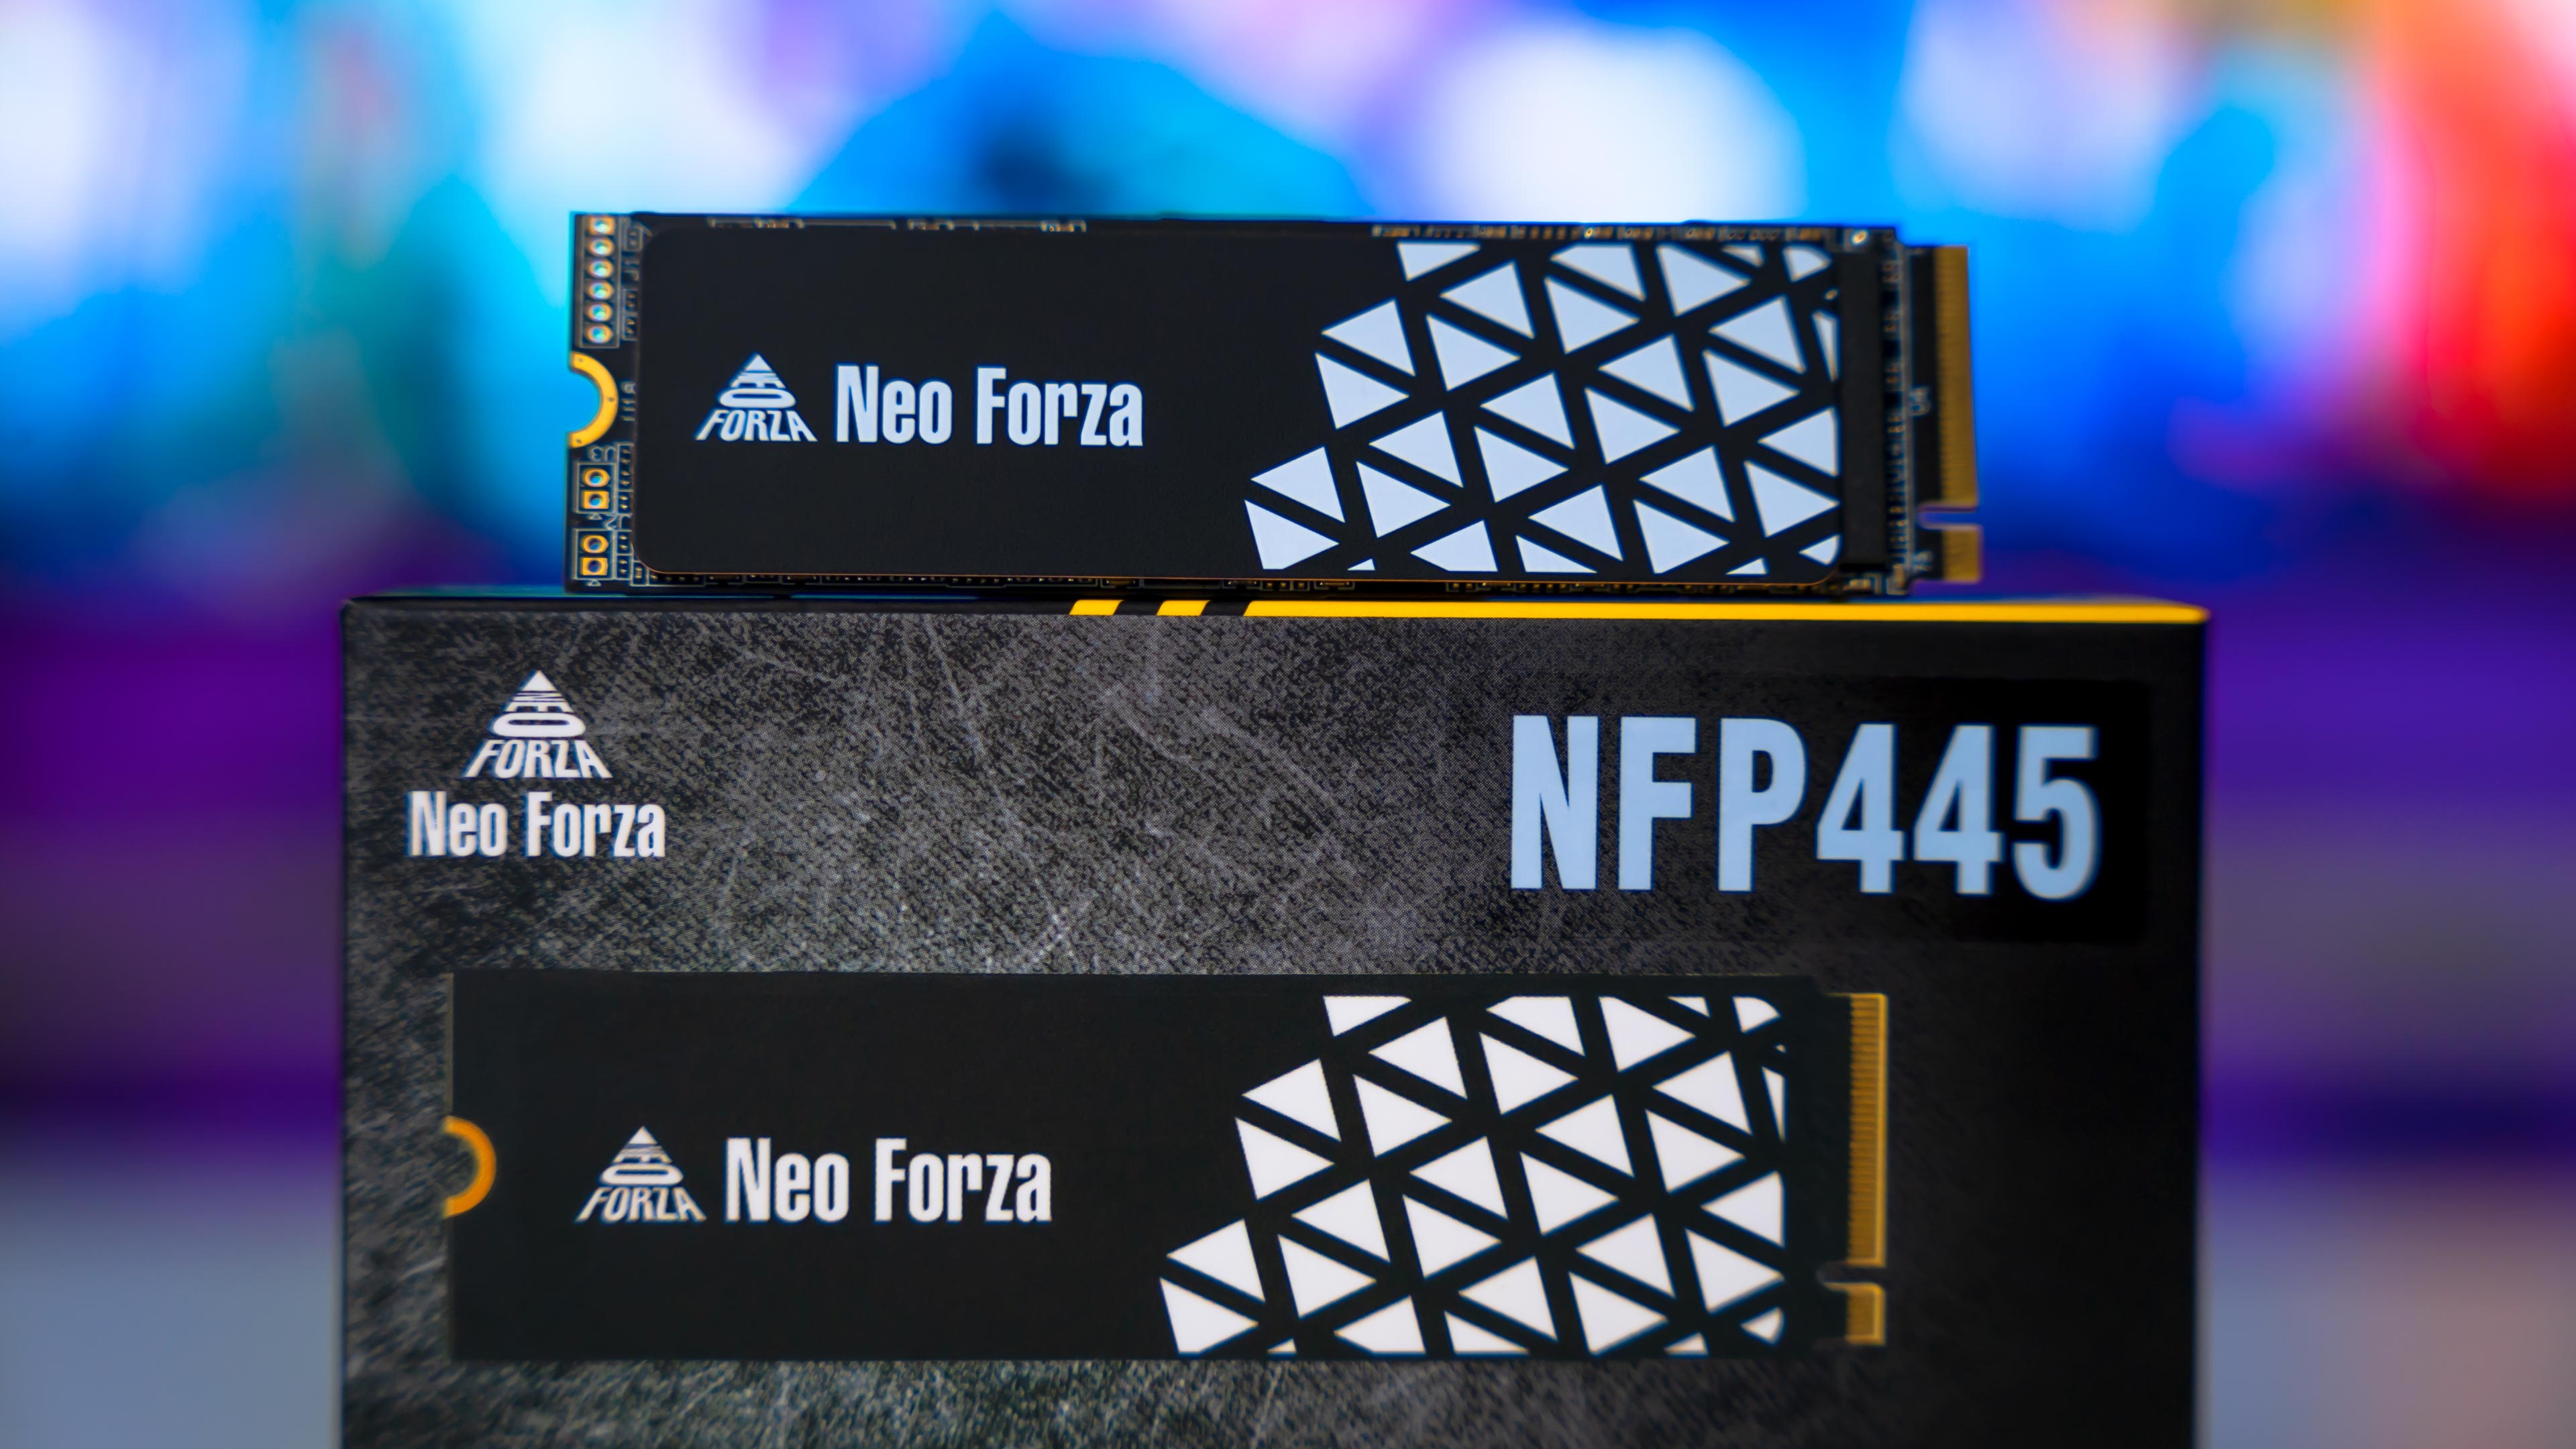 Neo Forza NFP445 1TB Gen4